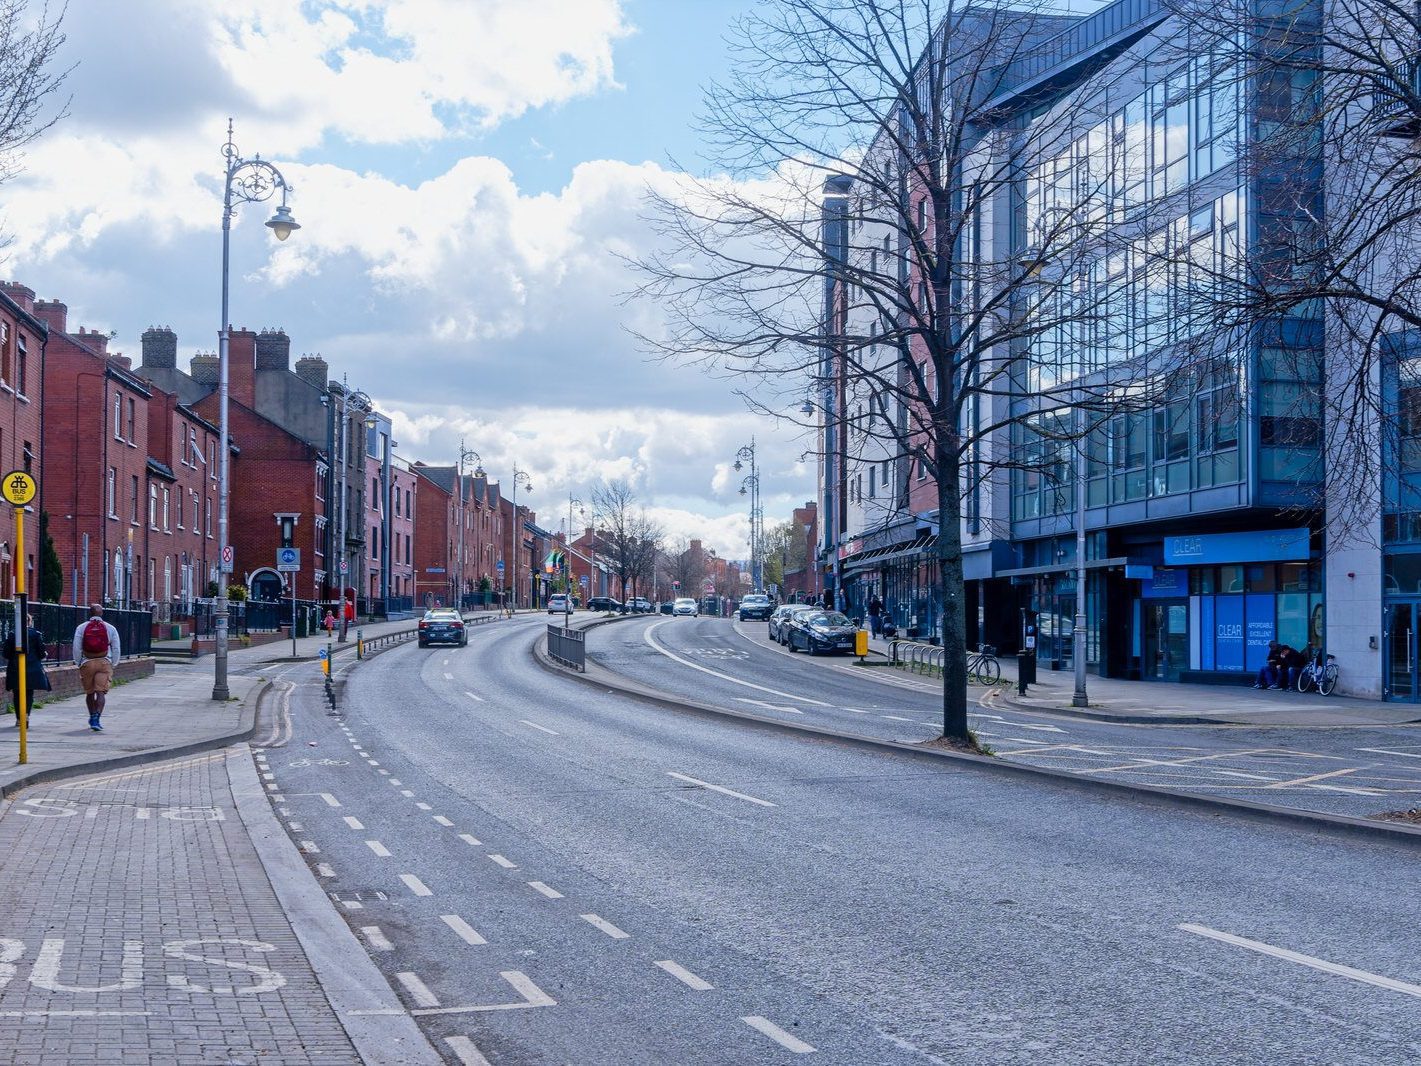 I WALKED ALONG NEW STREET SOUTH AND CLANBRASSIL STREET 004